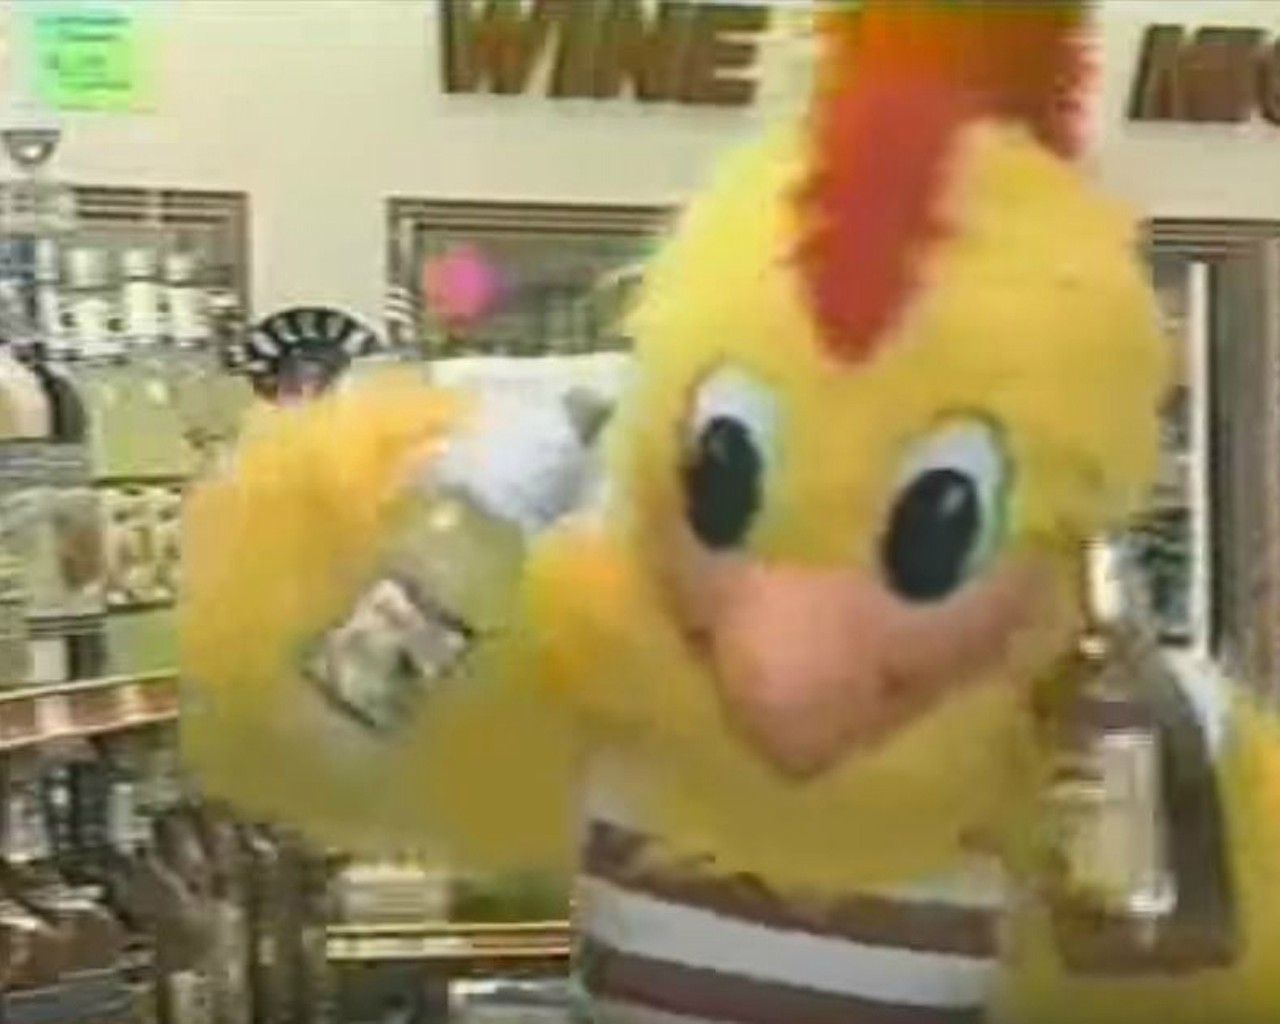 Dirt Cheap
Dirt Cheap had some of the most memorable local commericals of all time. Most of the spots stared either the store's mascot -- the Dirt Cheap chicken -- or notable antihero Fred Teutenberg. Teutenberg passed a couple of years back, but we'll always have his words of wisdom: "The more she drinks, the better you look."
Photo courtesy of YouTube